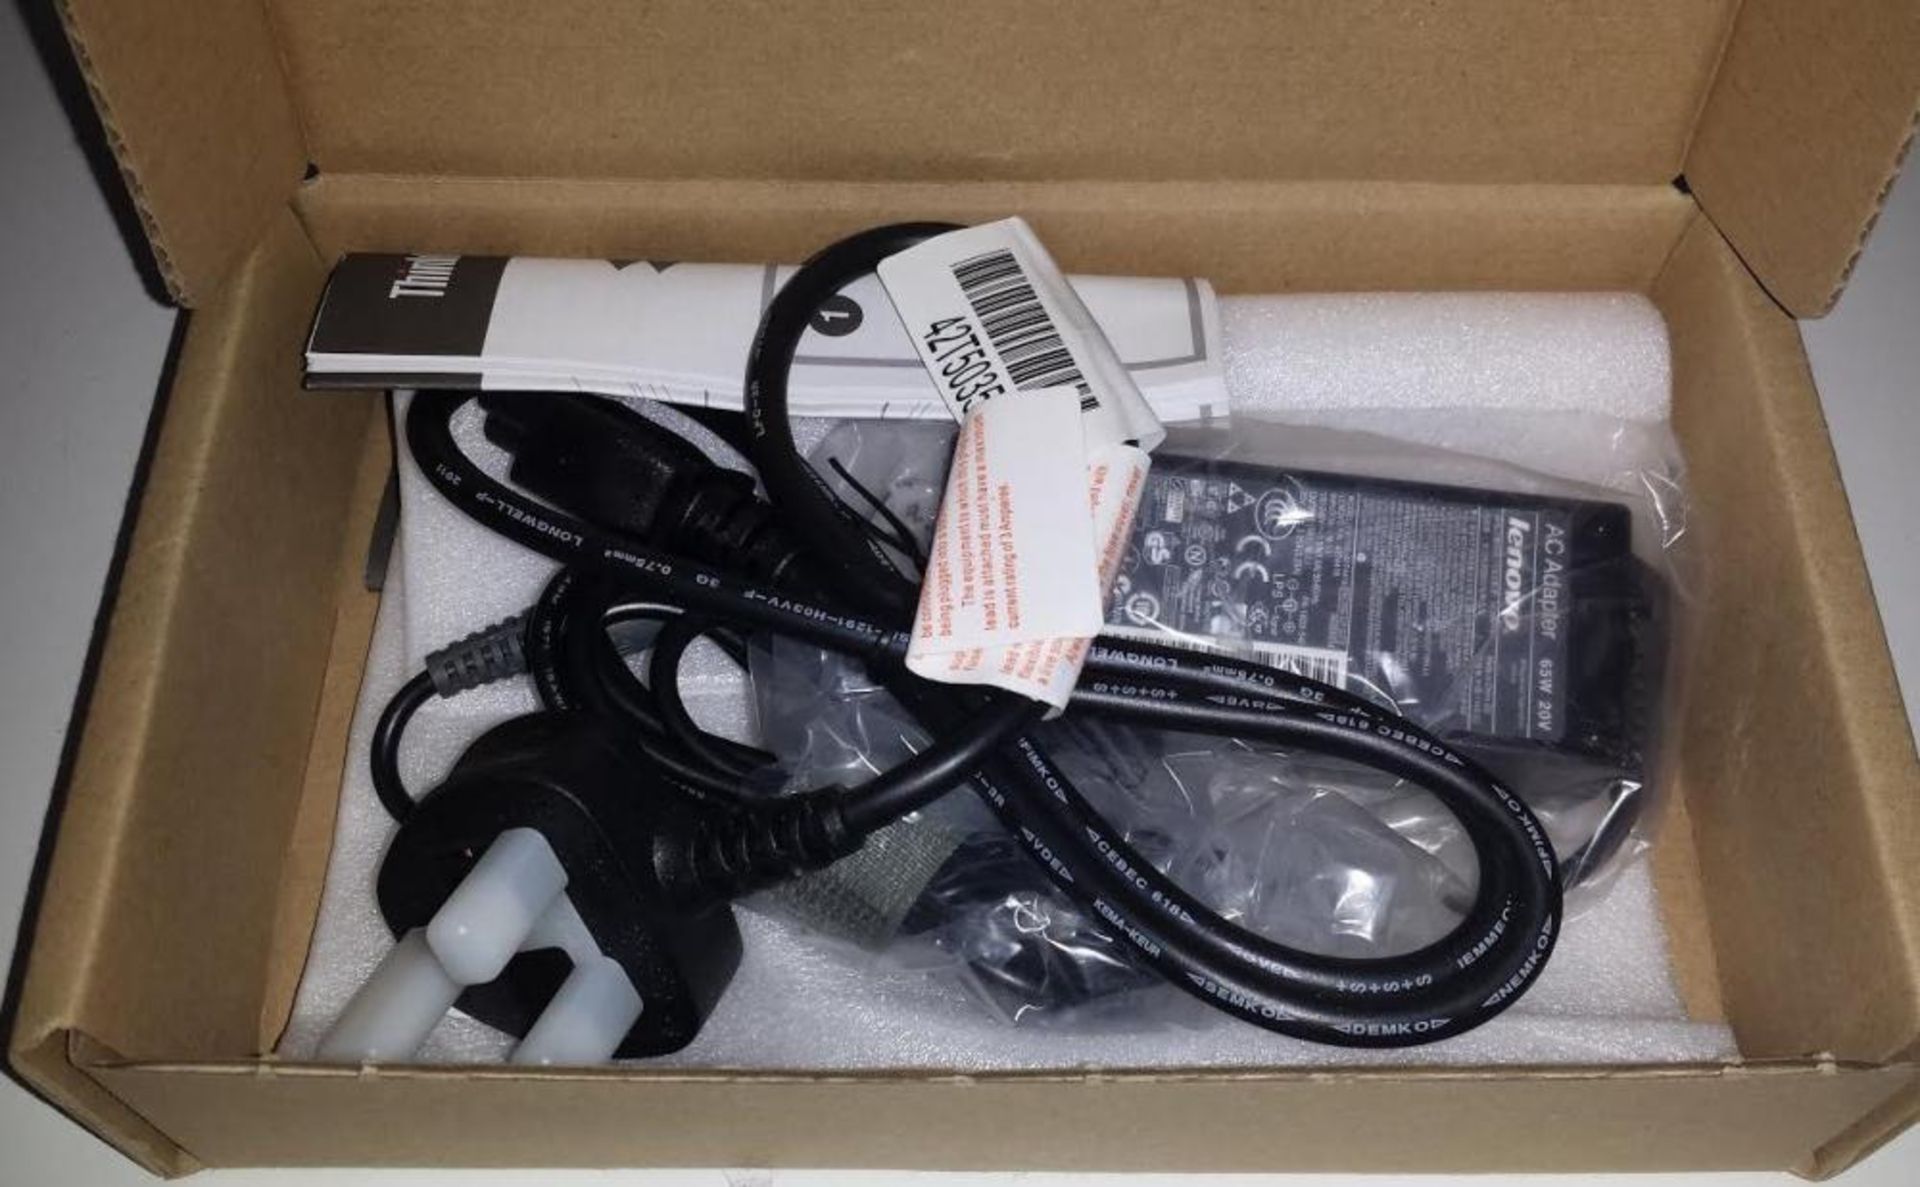 1 x ThinkPad and Lenovo 65W Ultraportable AC Laptop Adapter - New in Box - CL400 - Ref JP1035 - Loca - Image 3 of 3